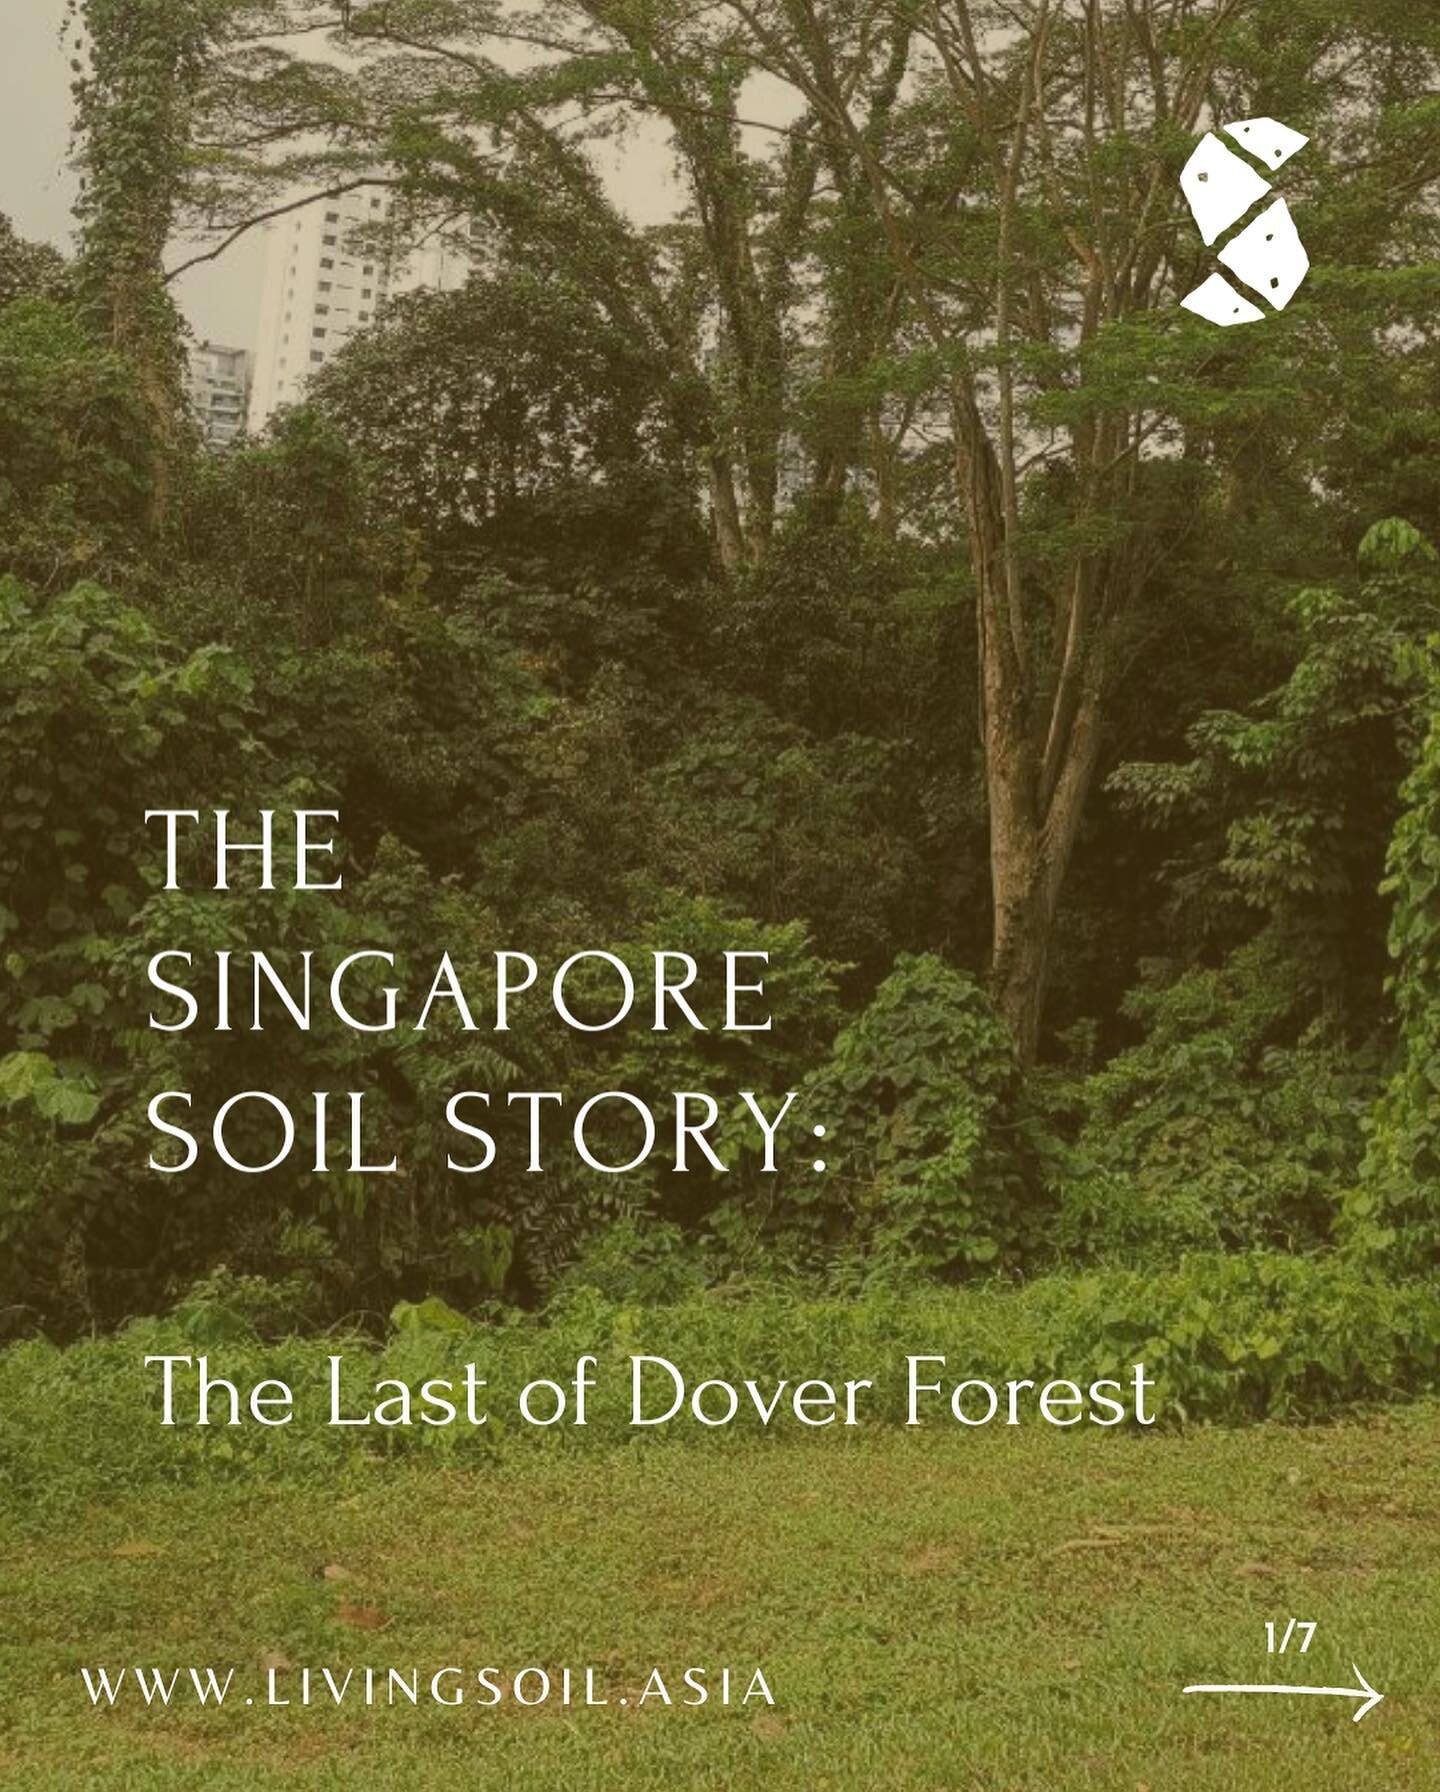 When you think of stories of our land here in Singapore, what comes to mind?

In our series The Singapore Soil Story, we begin to unearth the stories of the worlds beneath our feet through the lens of the soil regenerators&hellip;

And that includes&